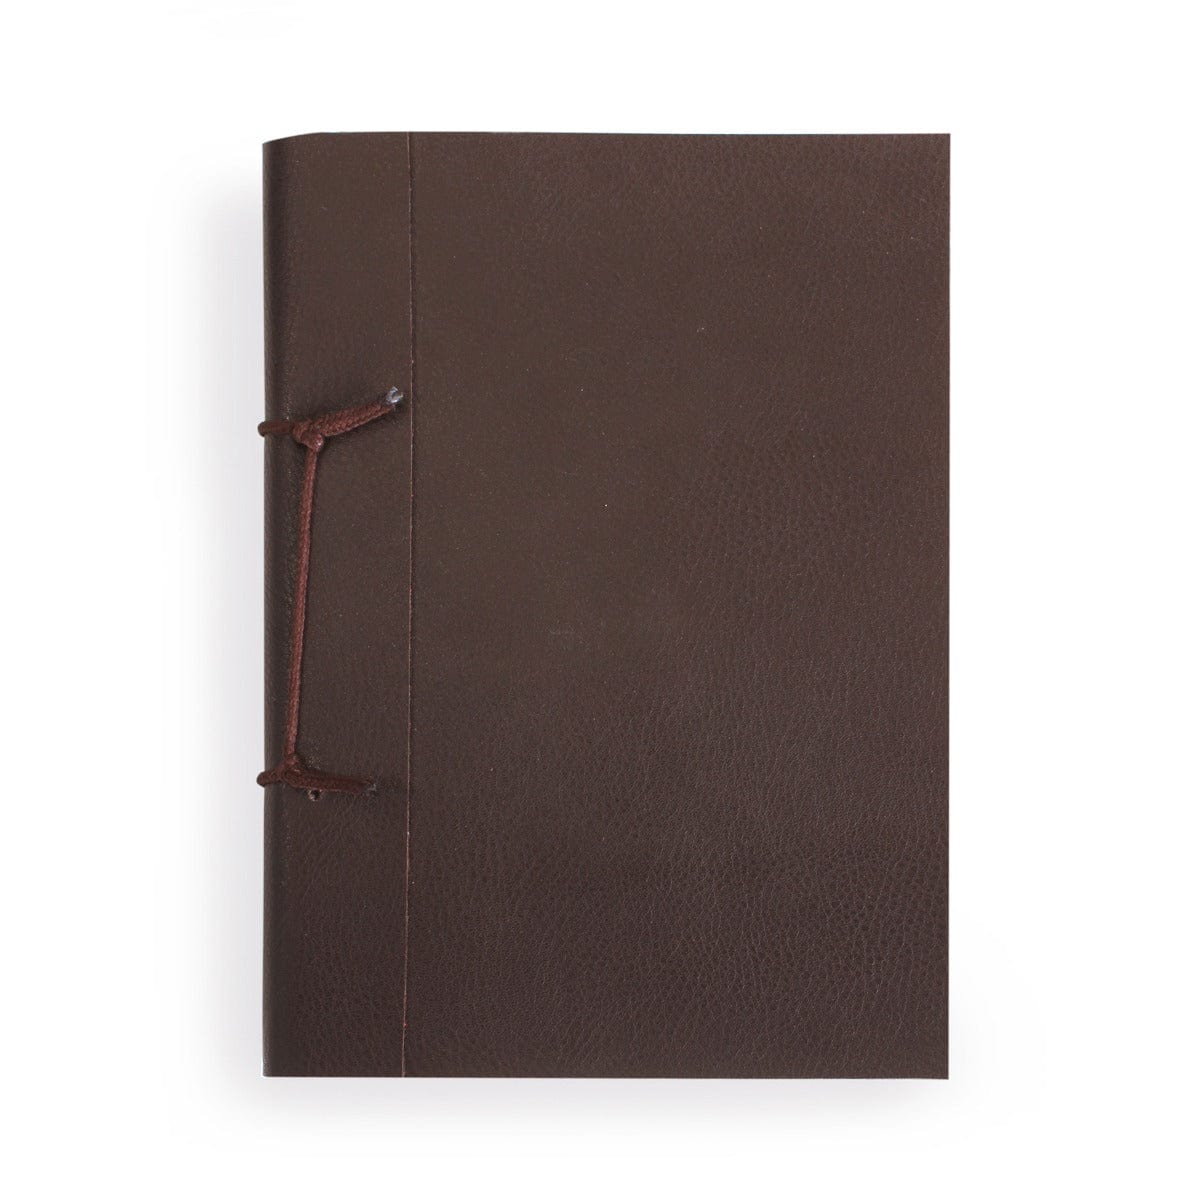 Gifts of Love Notebook Rossi Chocolate Brown